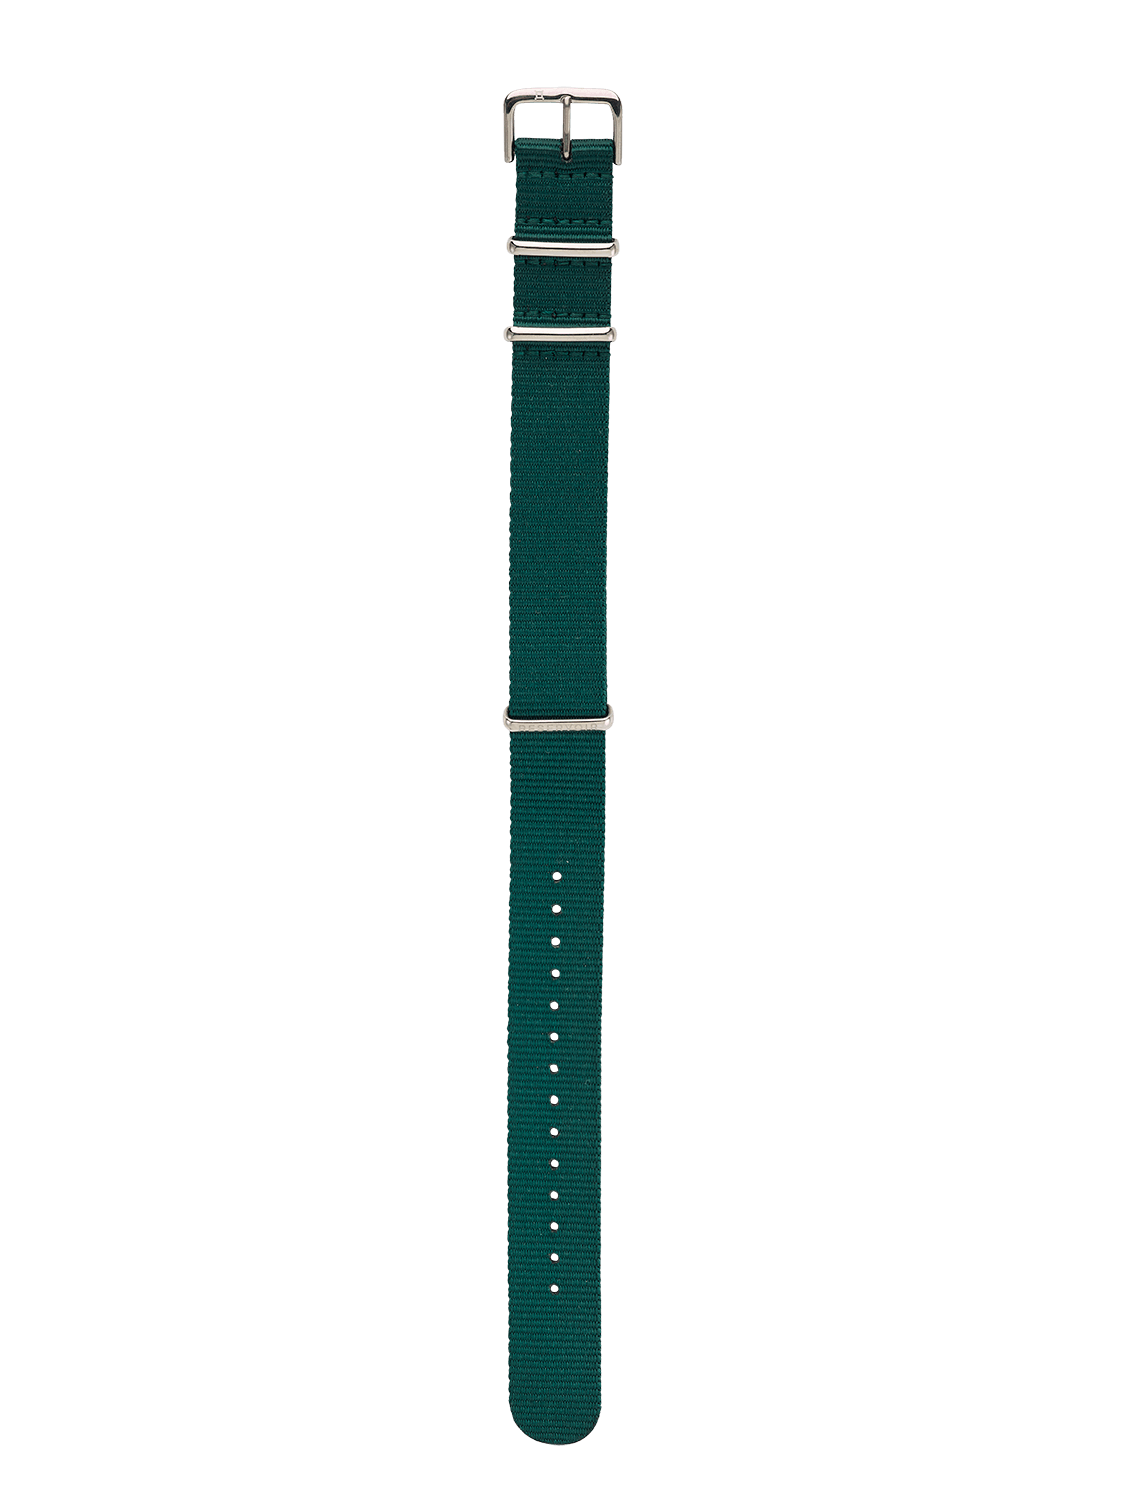 Nato Strap Watch with Jet Black, Light Grey, and Dark Teal Colours